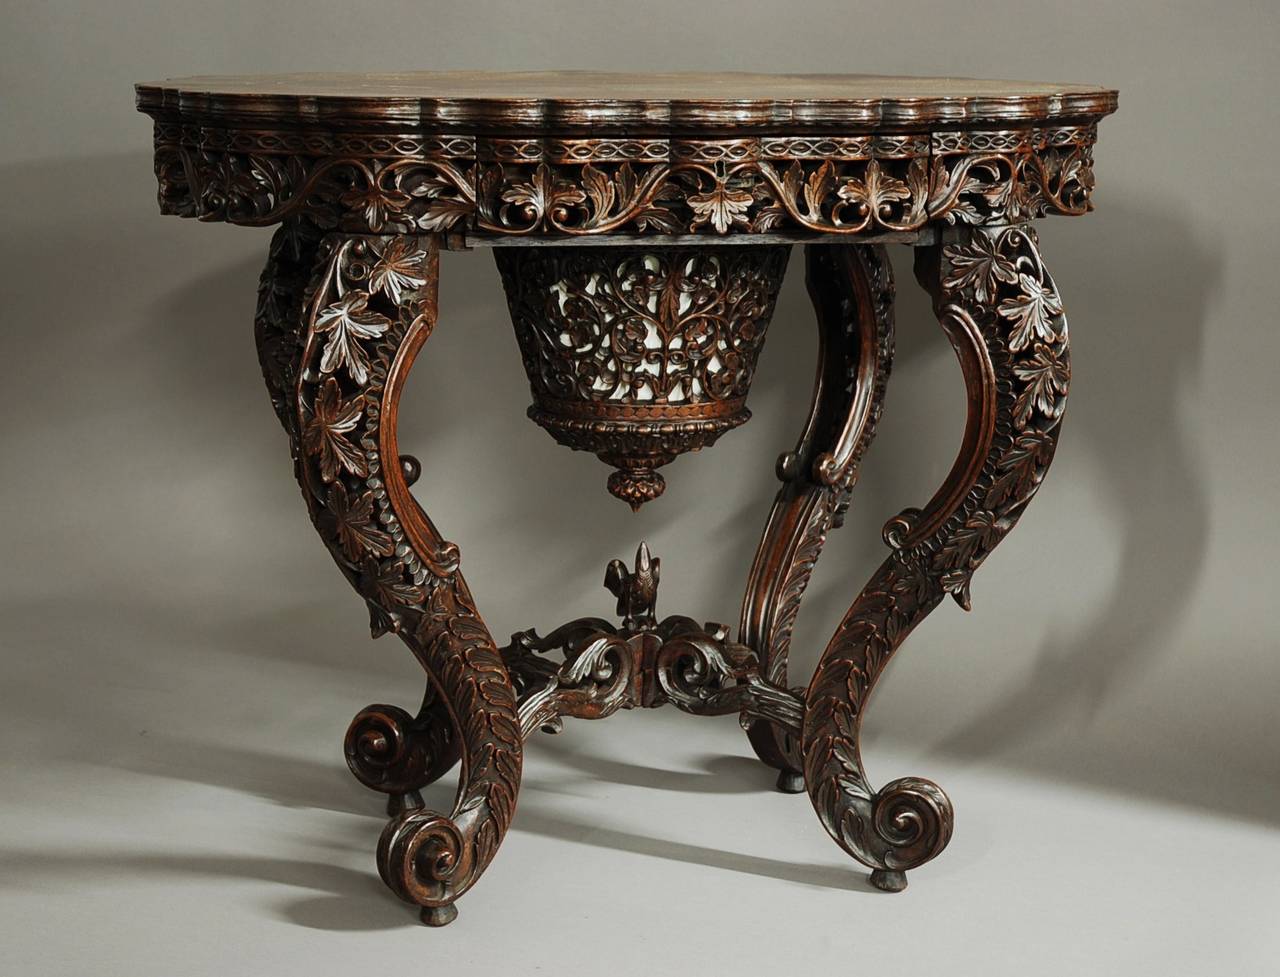 A superb quality Anglo-Indian padouk profusely carved work table.

This table consists of a shaped oval top of superb faded patina (color).

Underneath the top is a shaped and finely carved frieze with a pieced and scrolling leaf design